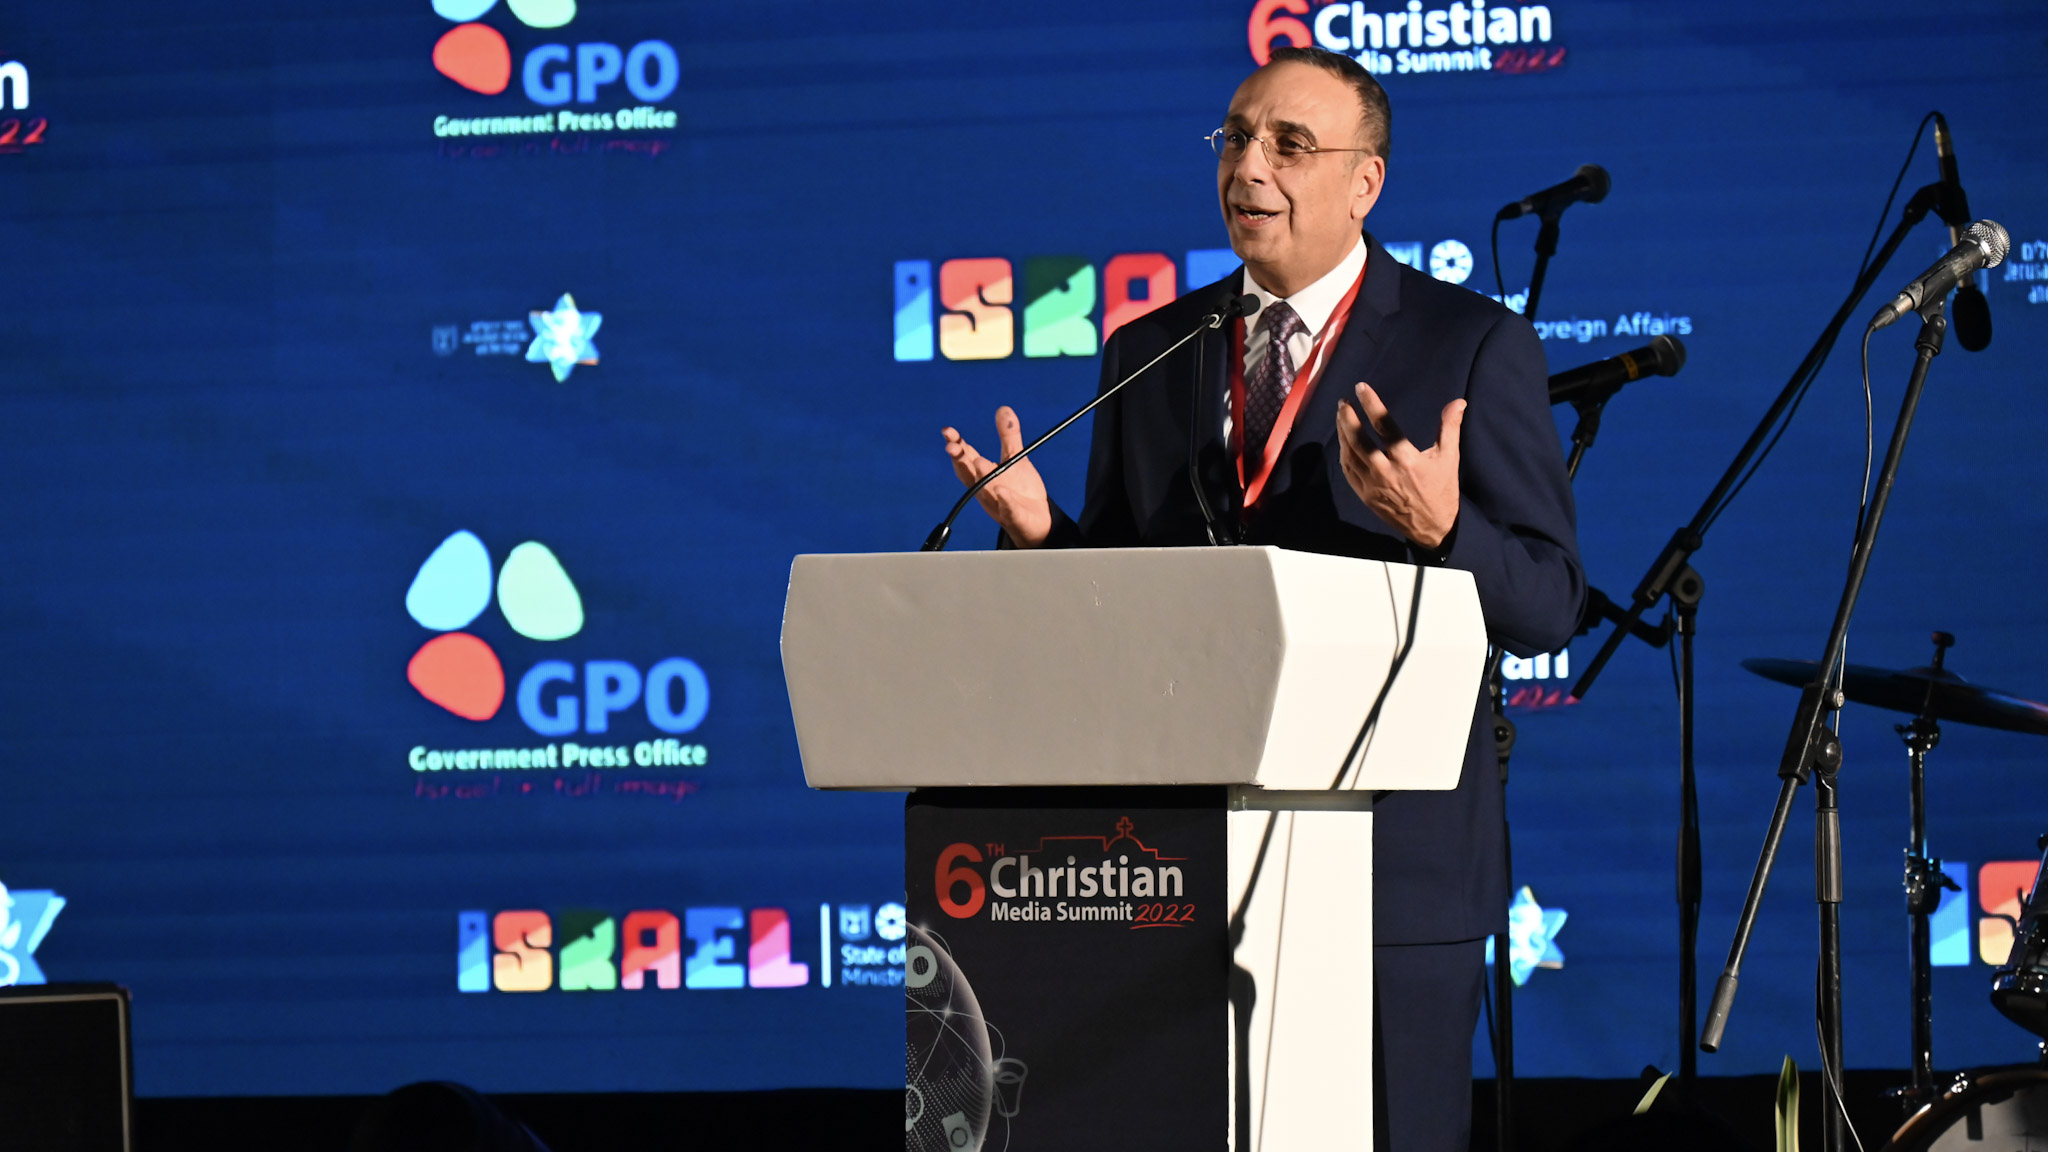 Nitzan Chen, Director of the Israel Government Press Office(GPO), gave an opening address to 120 media professionals in the gala evening of the sixth Christian Media Summit in Jerusalem, Israel, on December 11, 2022. 